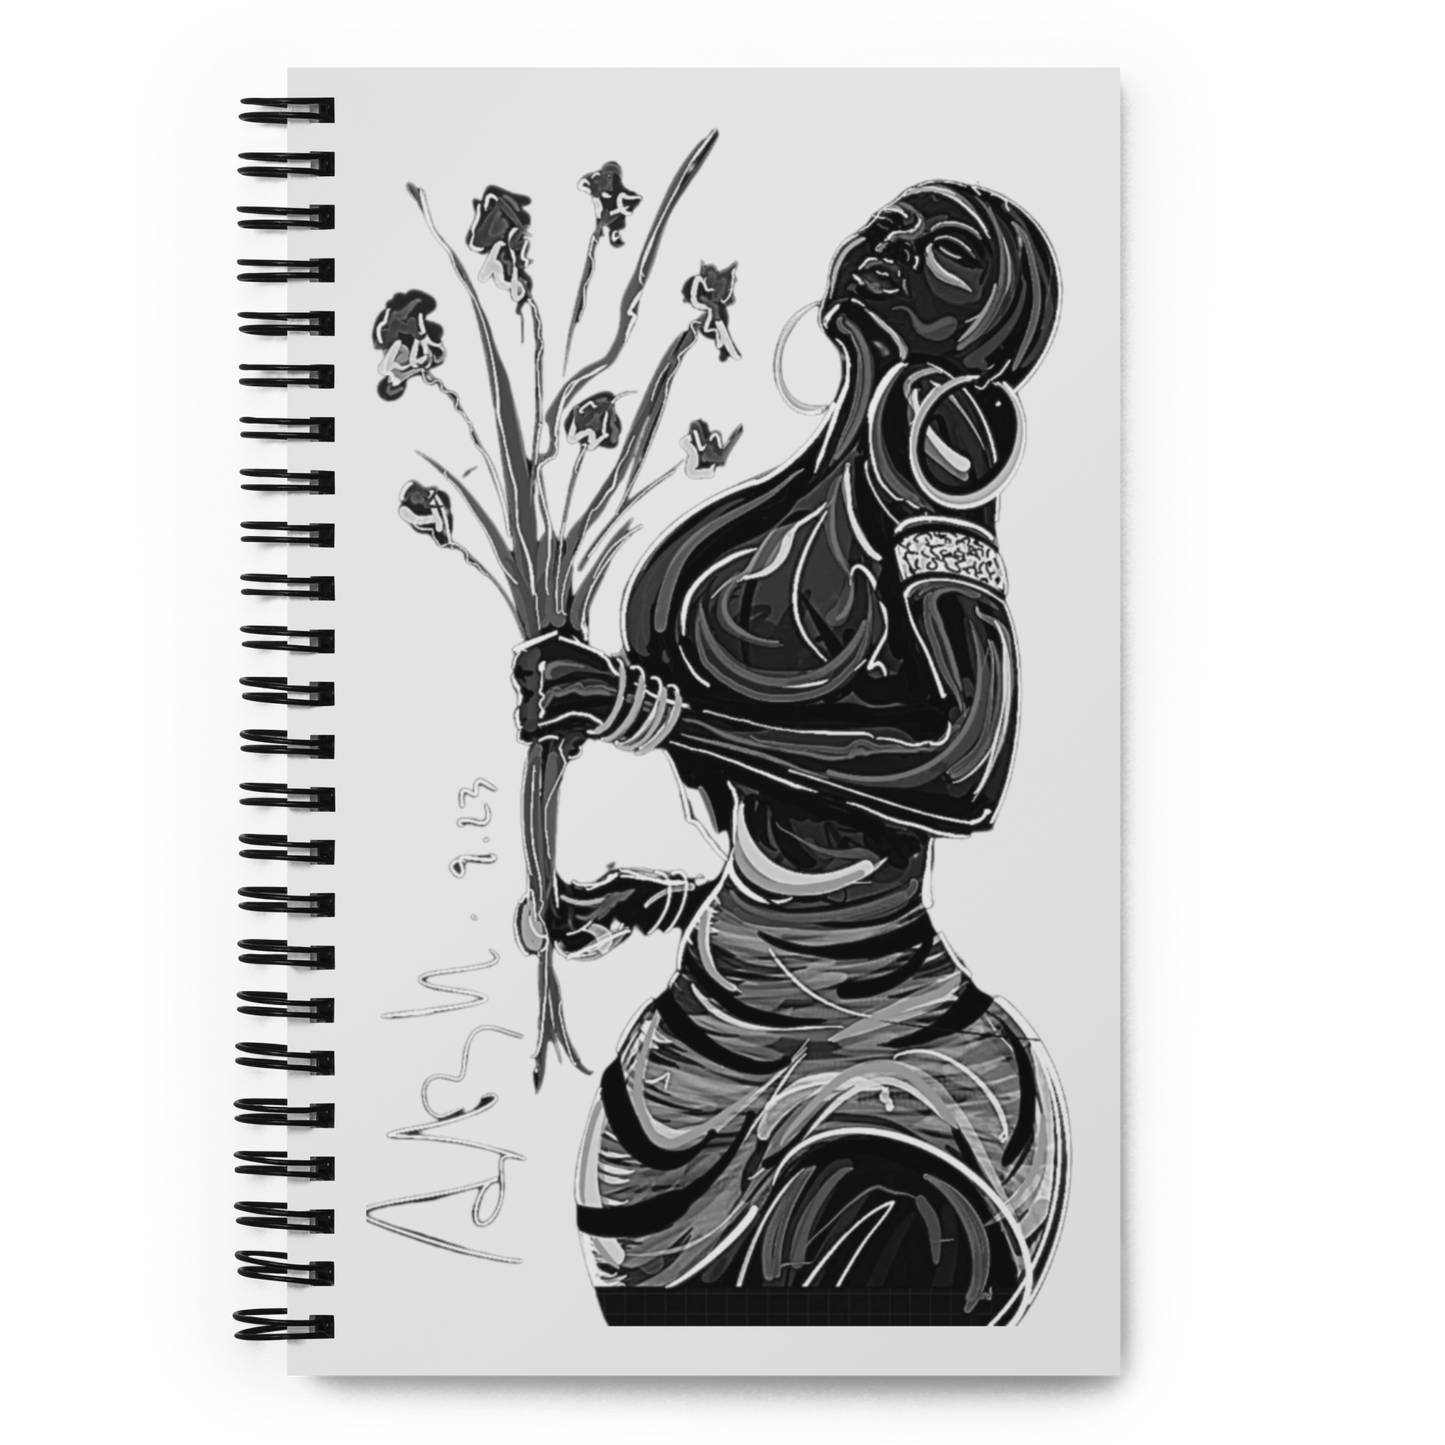 Reale Women ... Buy Themselves Flowers (Notebook-Grayscle)